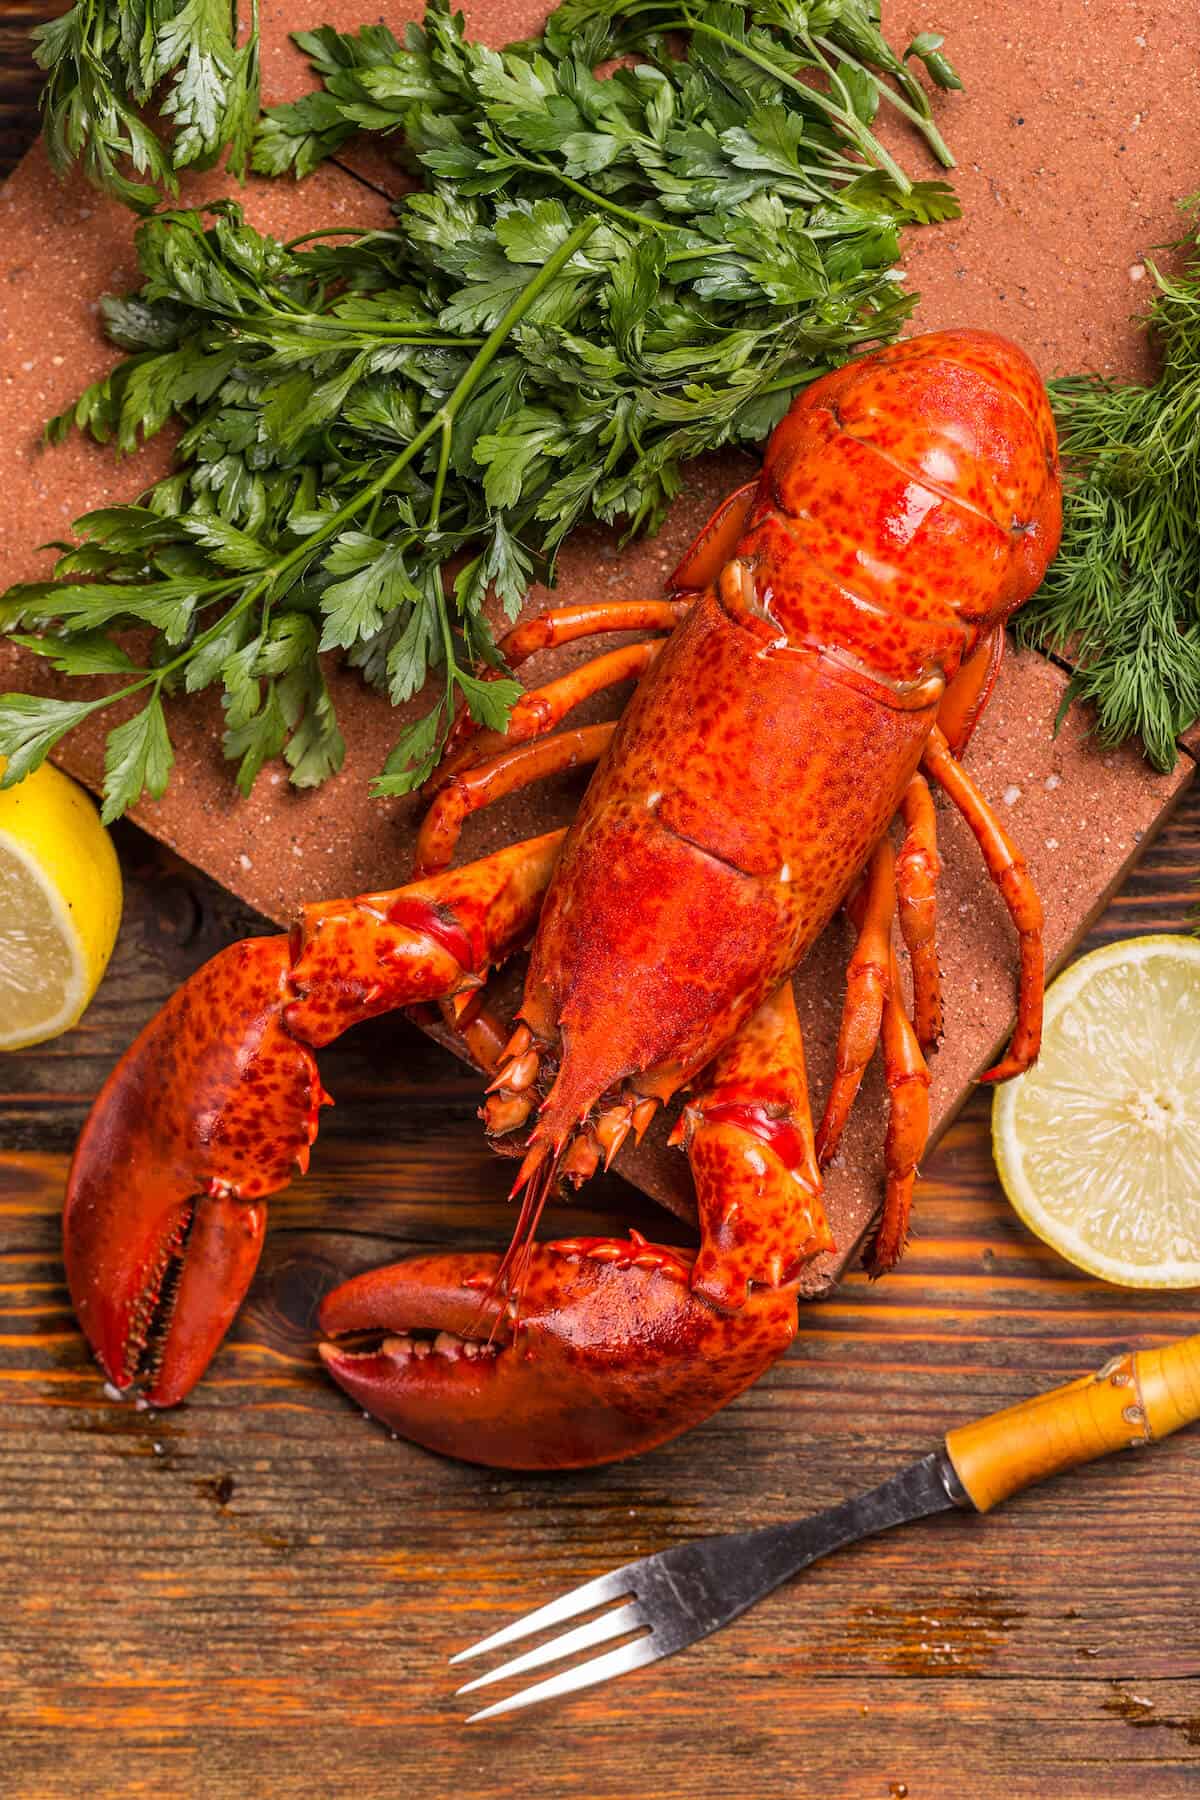 Top view of cooked lobster on wooden background.